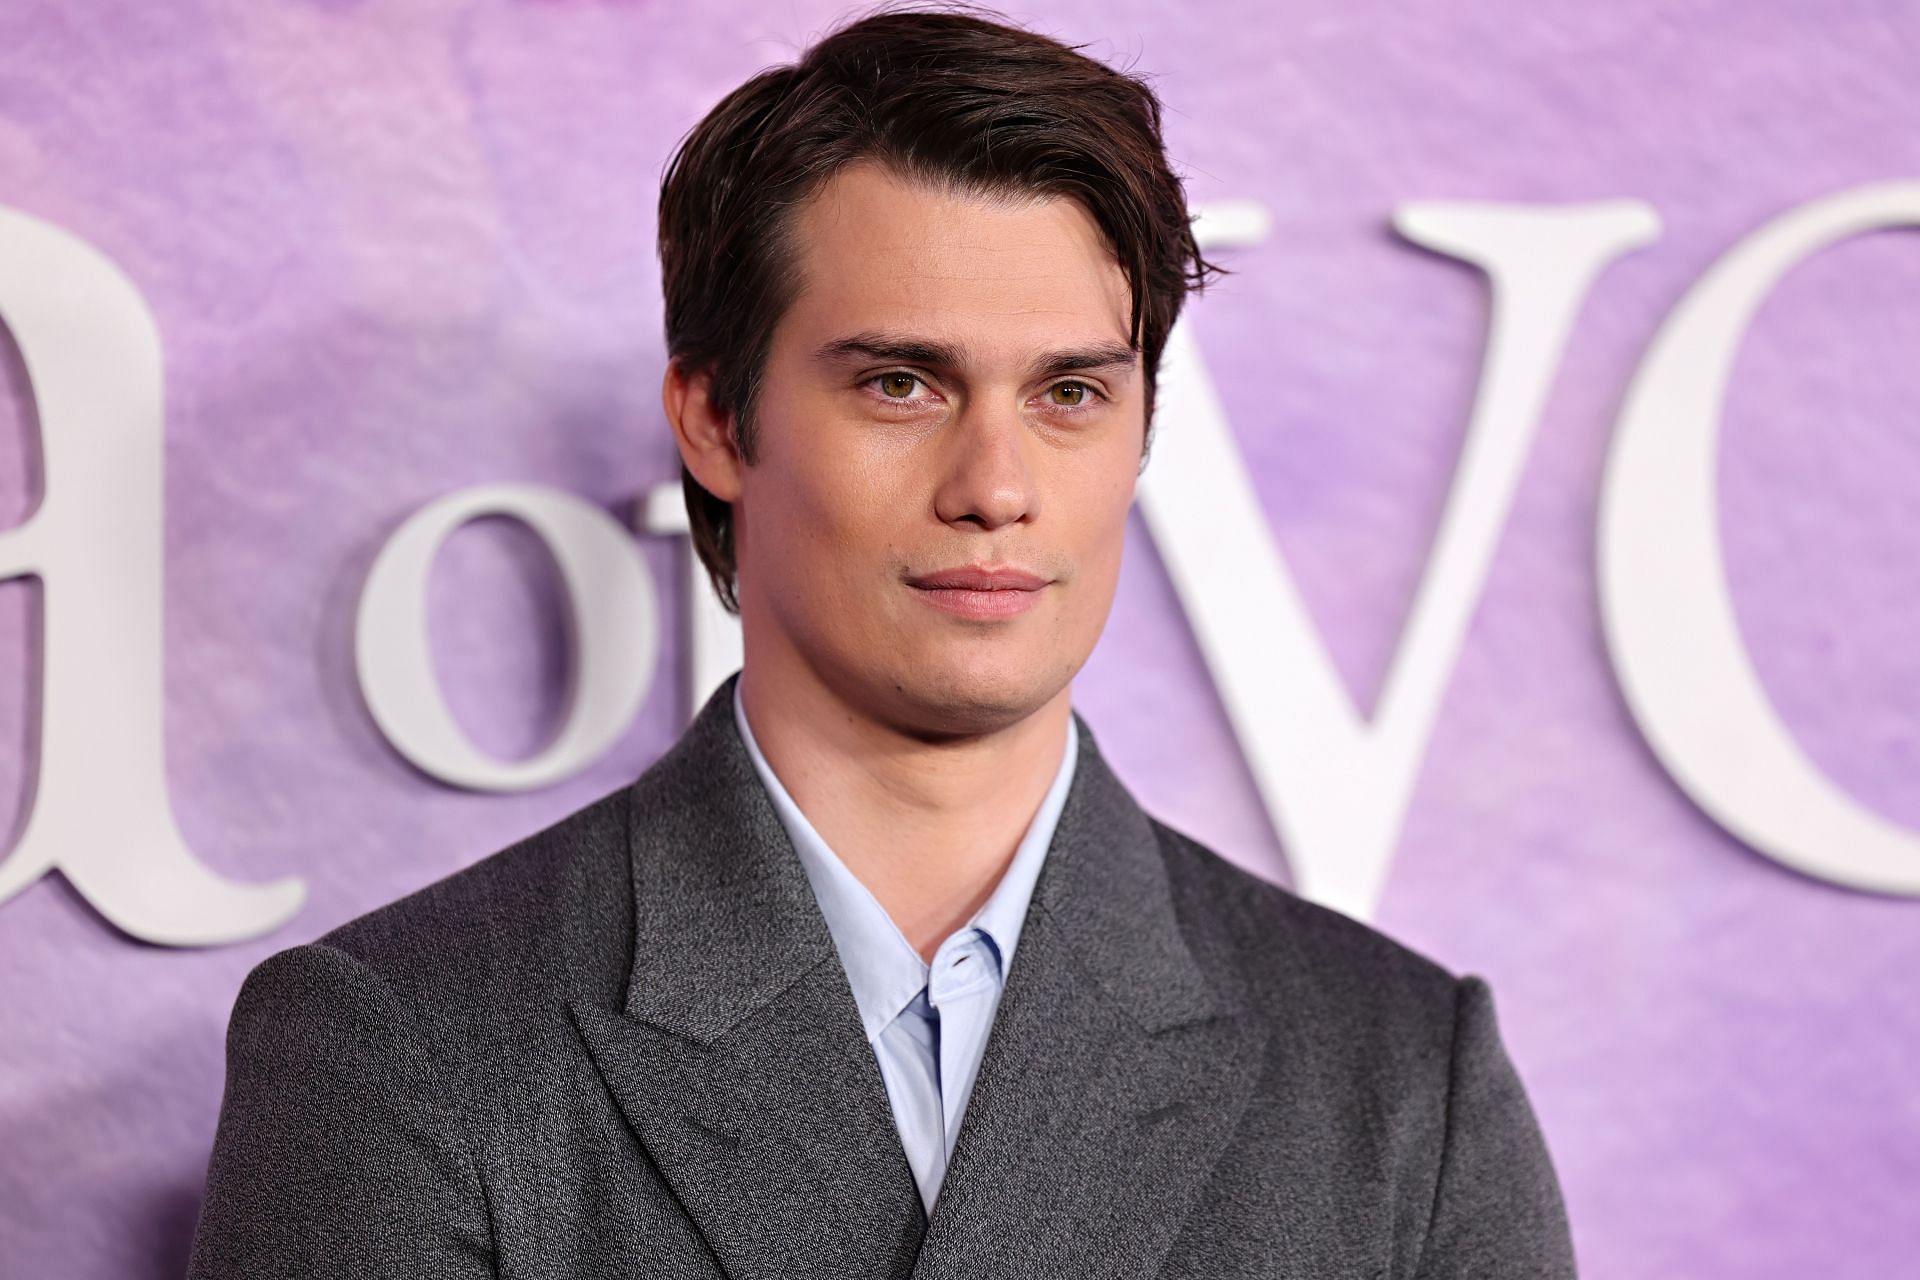 Nicholas Galitzine appears as Hayes Campbell in the movie (Image via Getty)